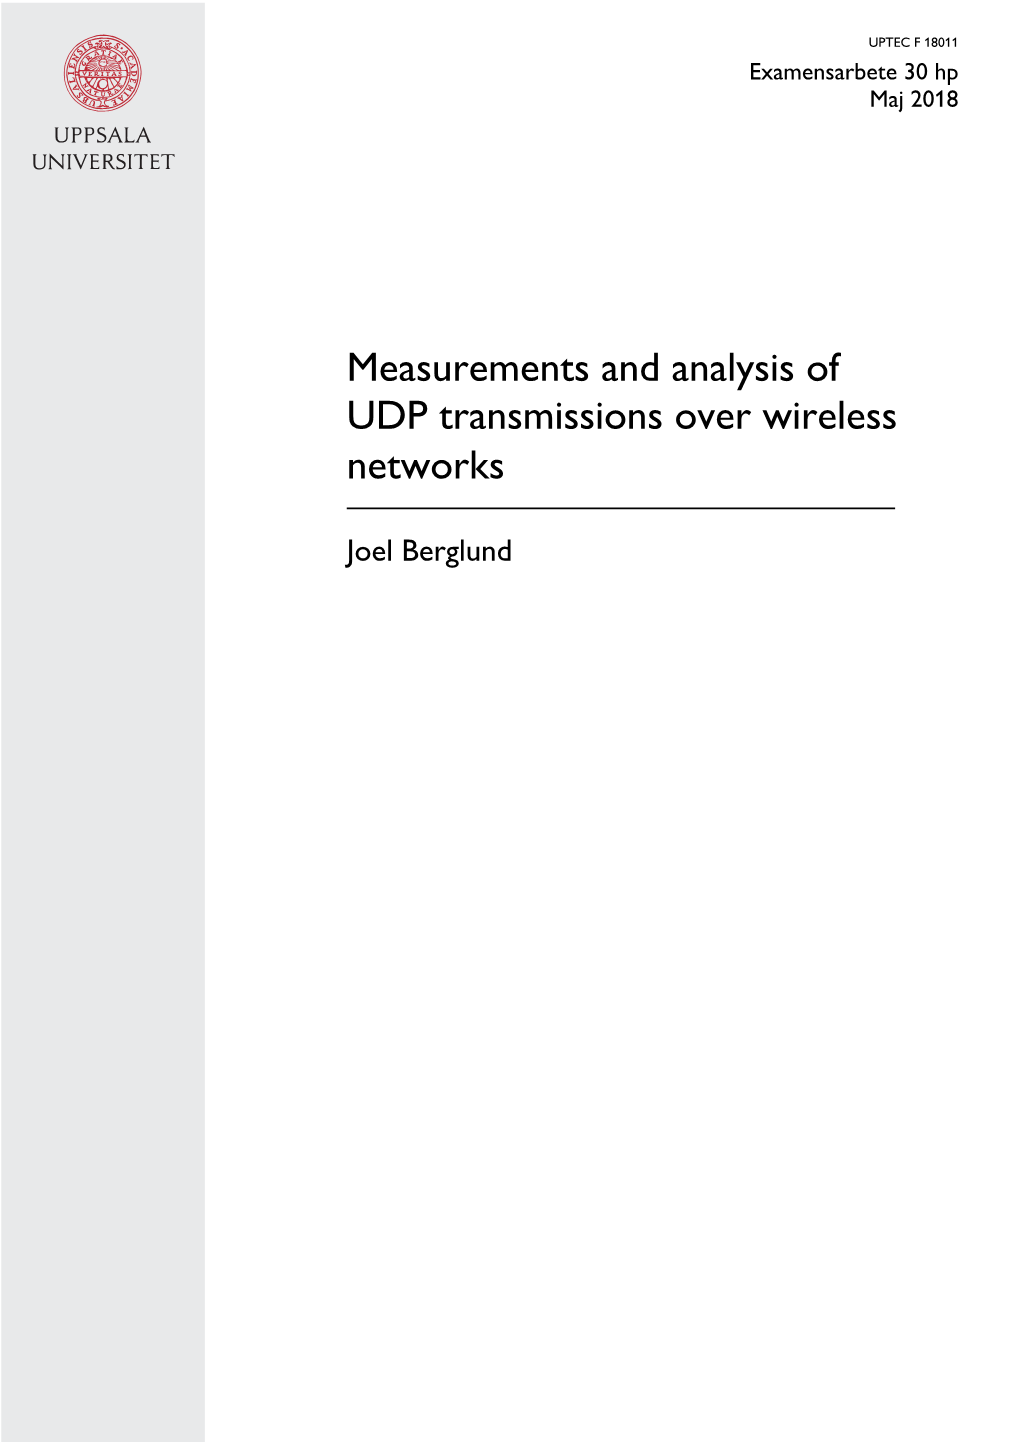 Measurements and Analysis of UDP Transmissions Over Wireless Networks